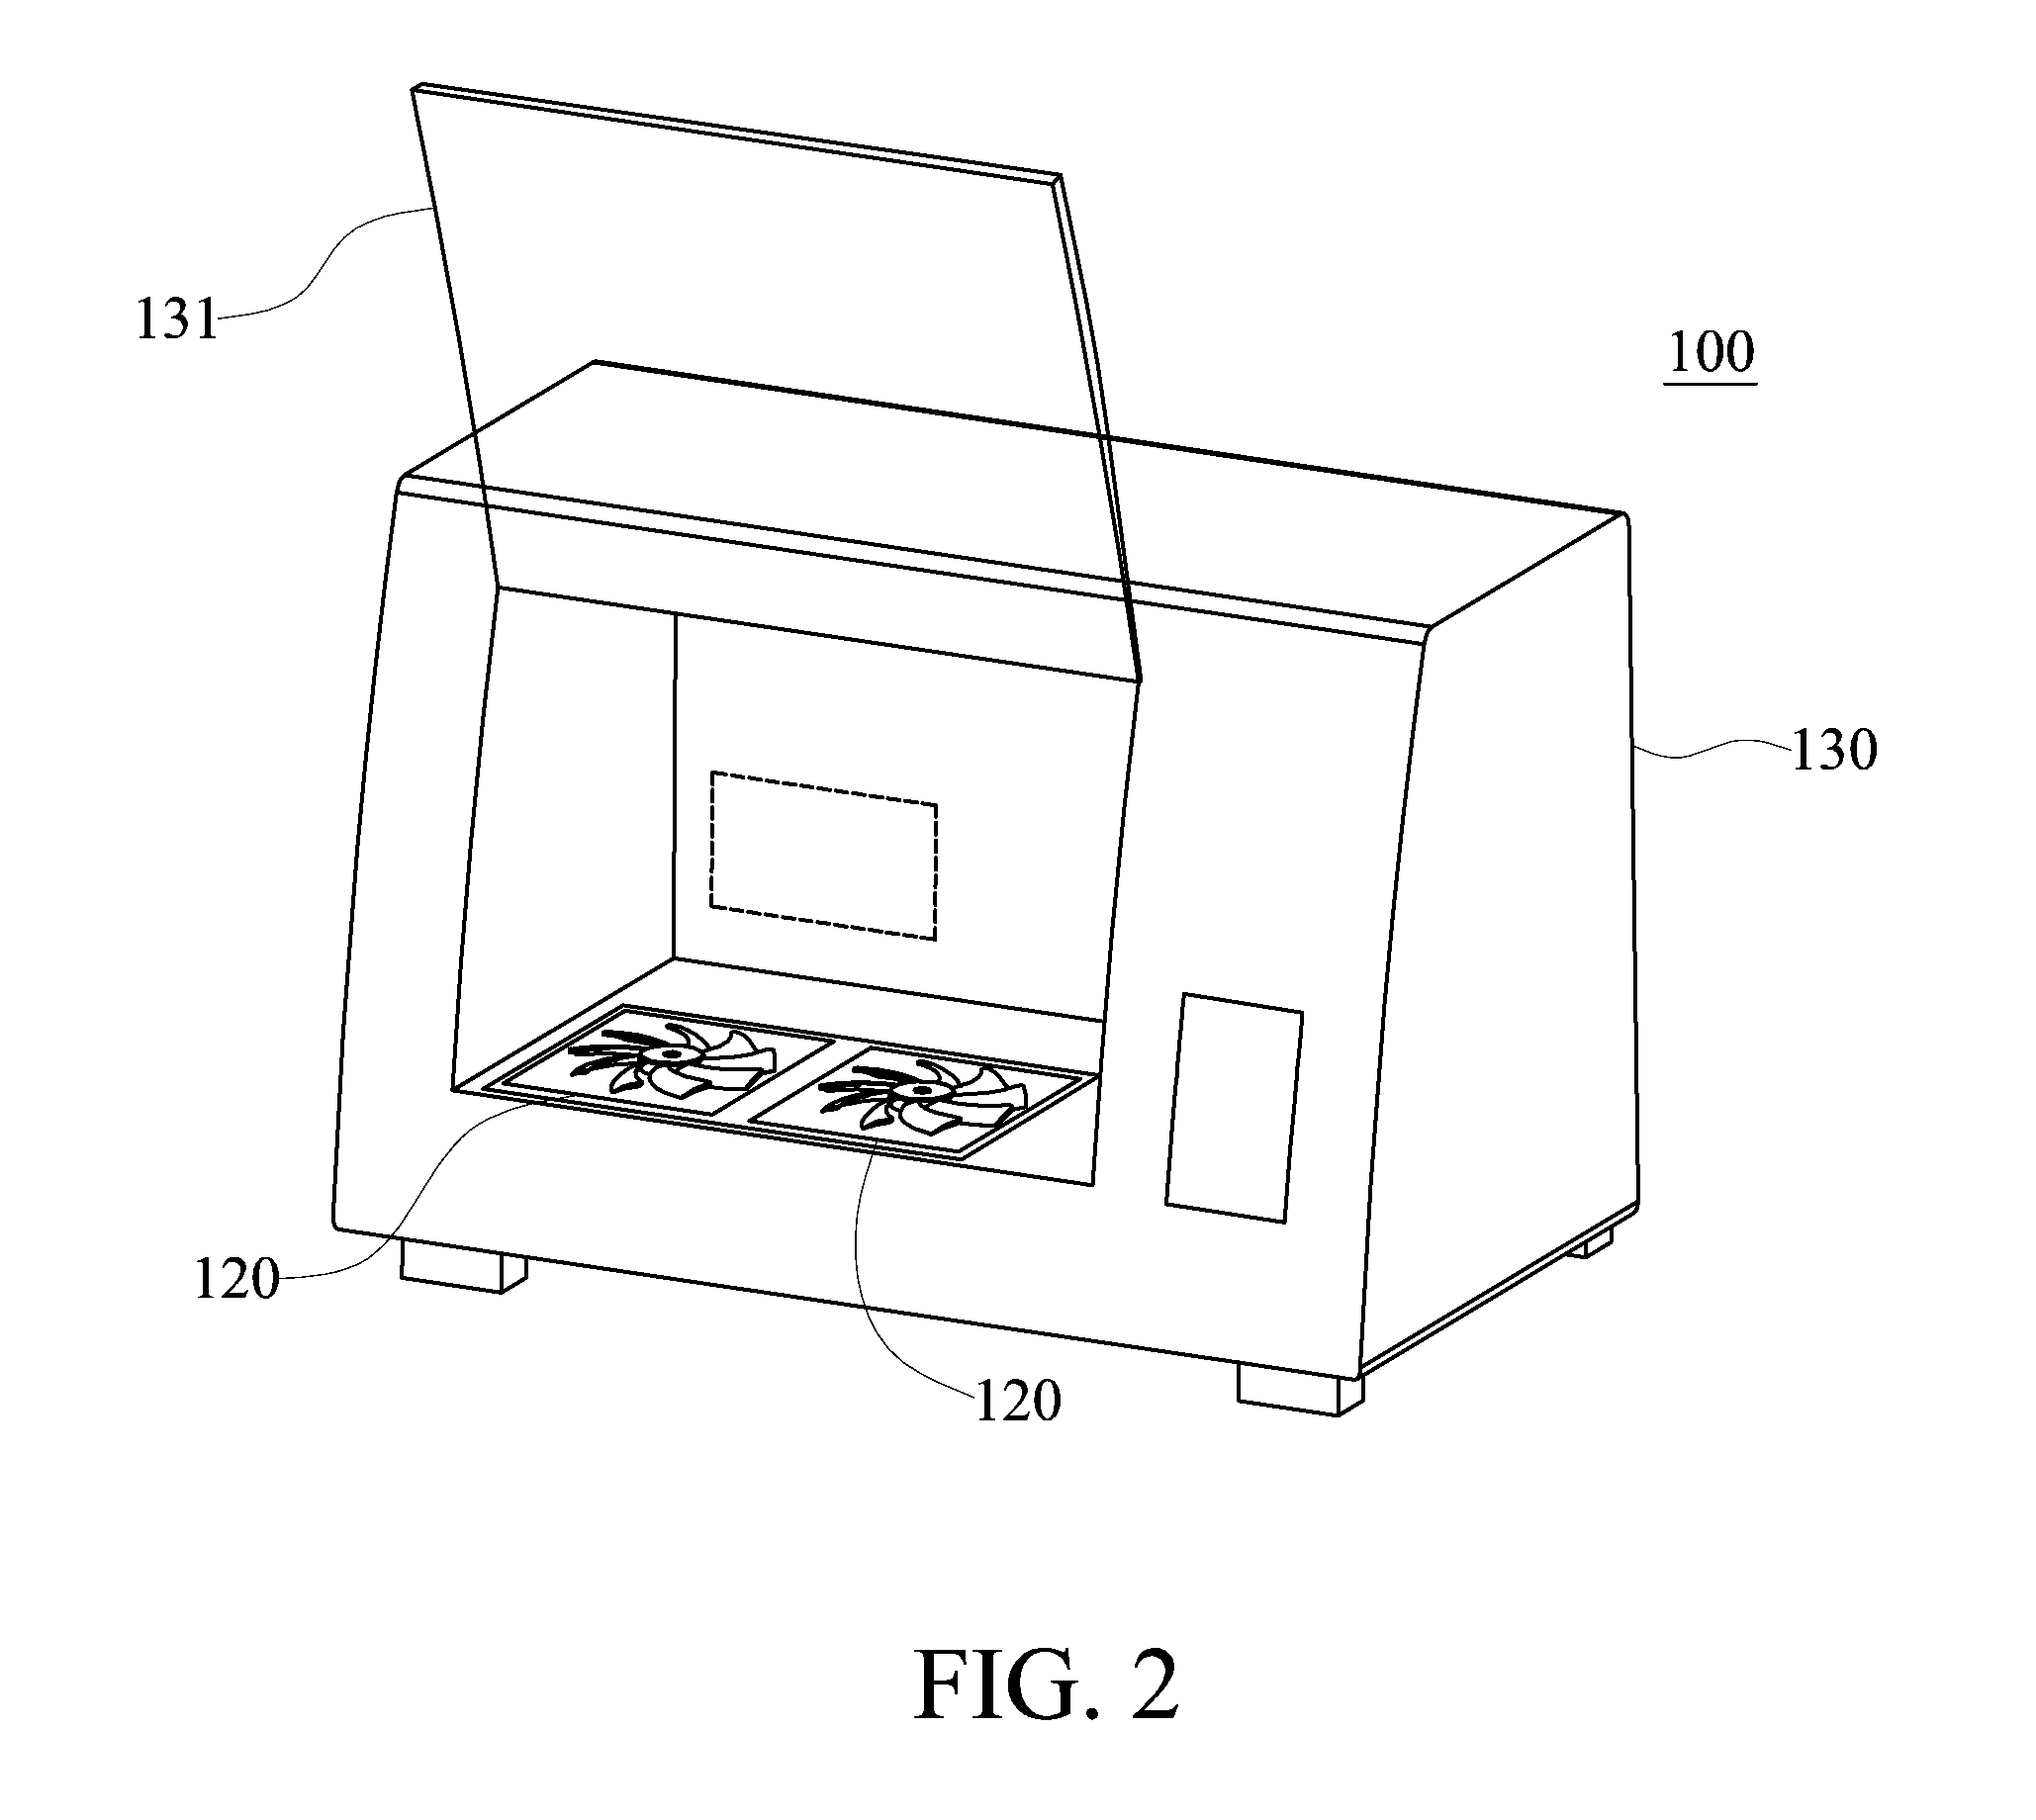 Method and device for producing optimized lipid-based micro/nano-bubbles